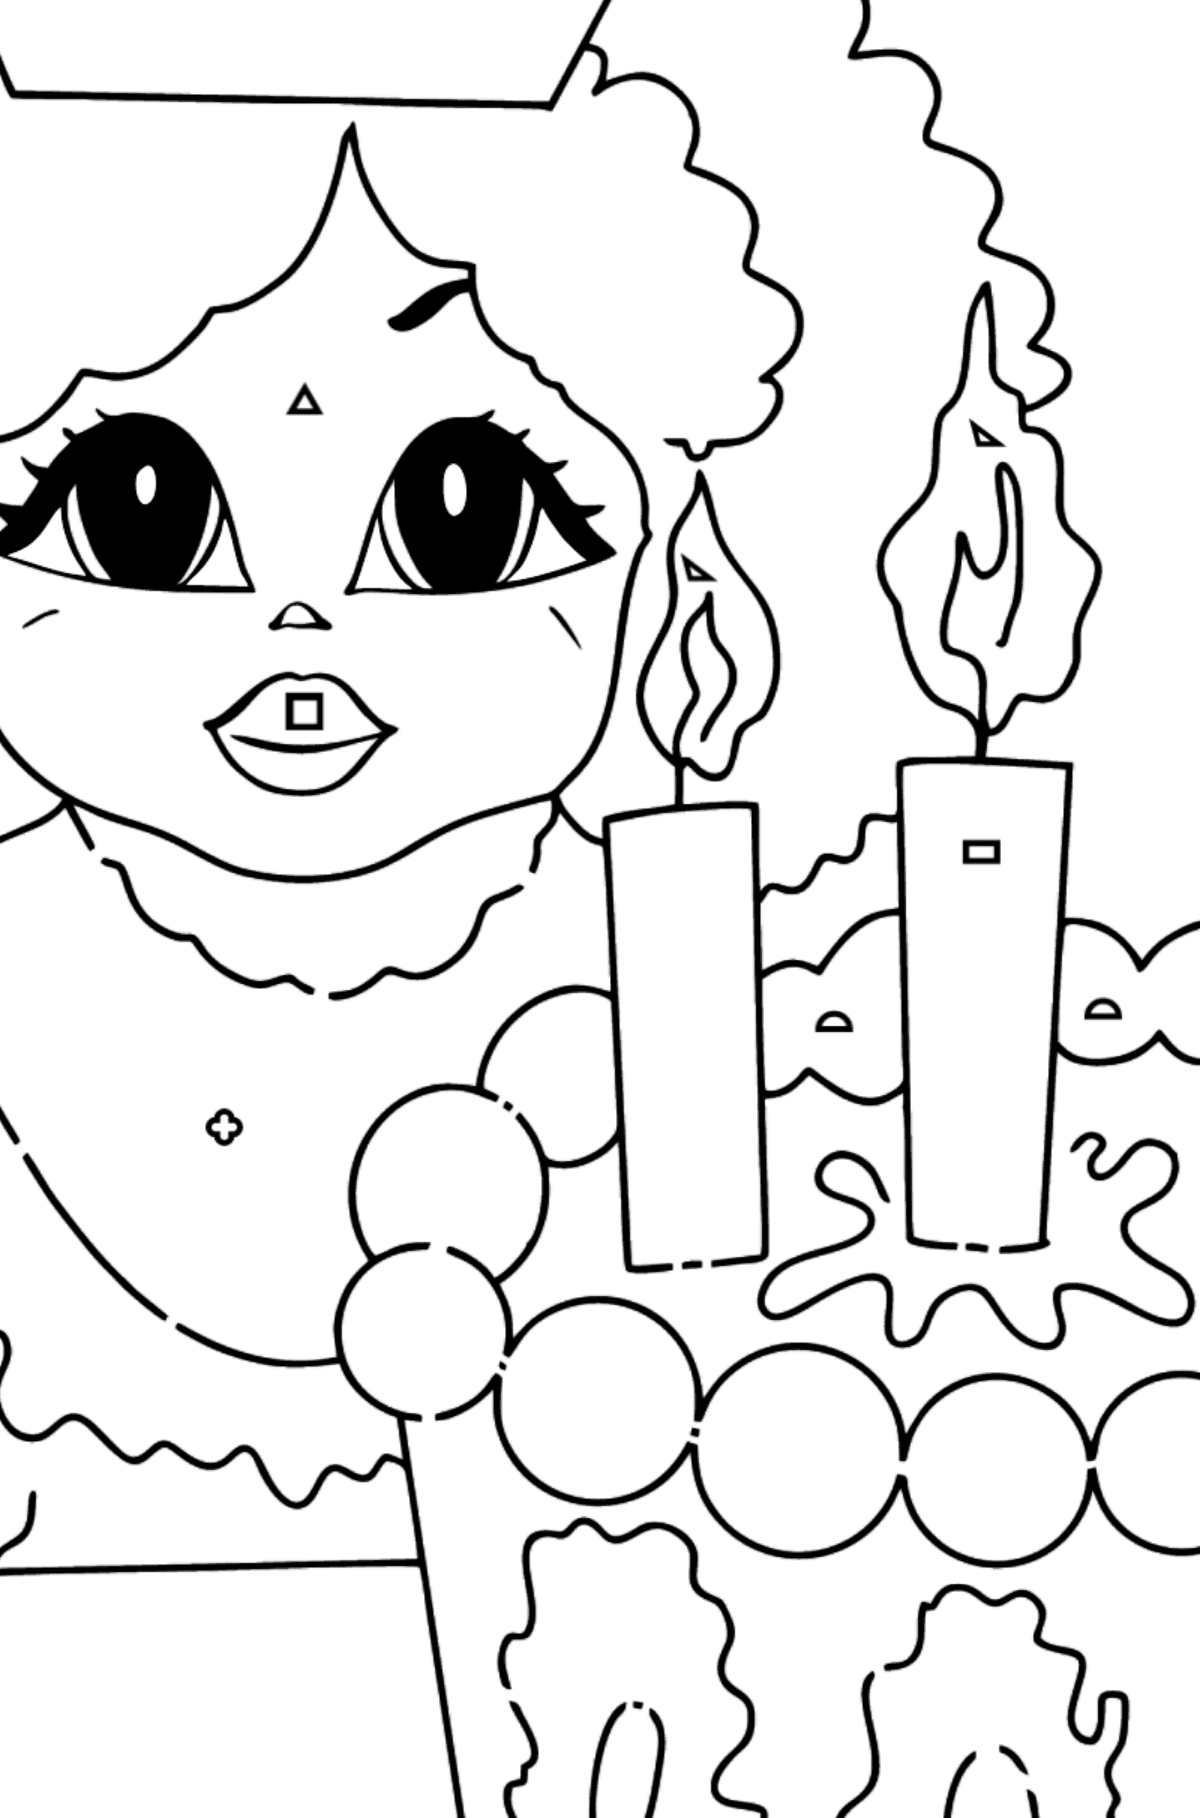 Coloring Page - A Princess with Cake - For Girls - Coloring by Geometric Shapes for Kids